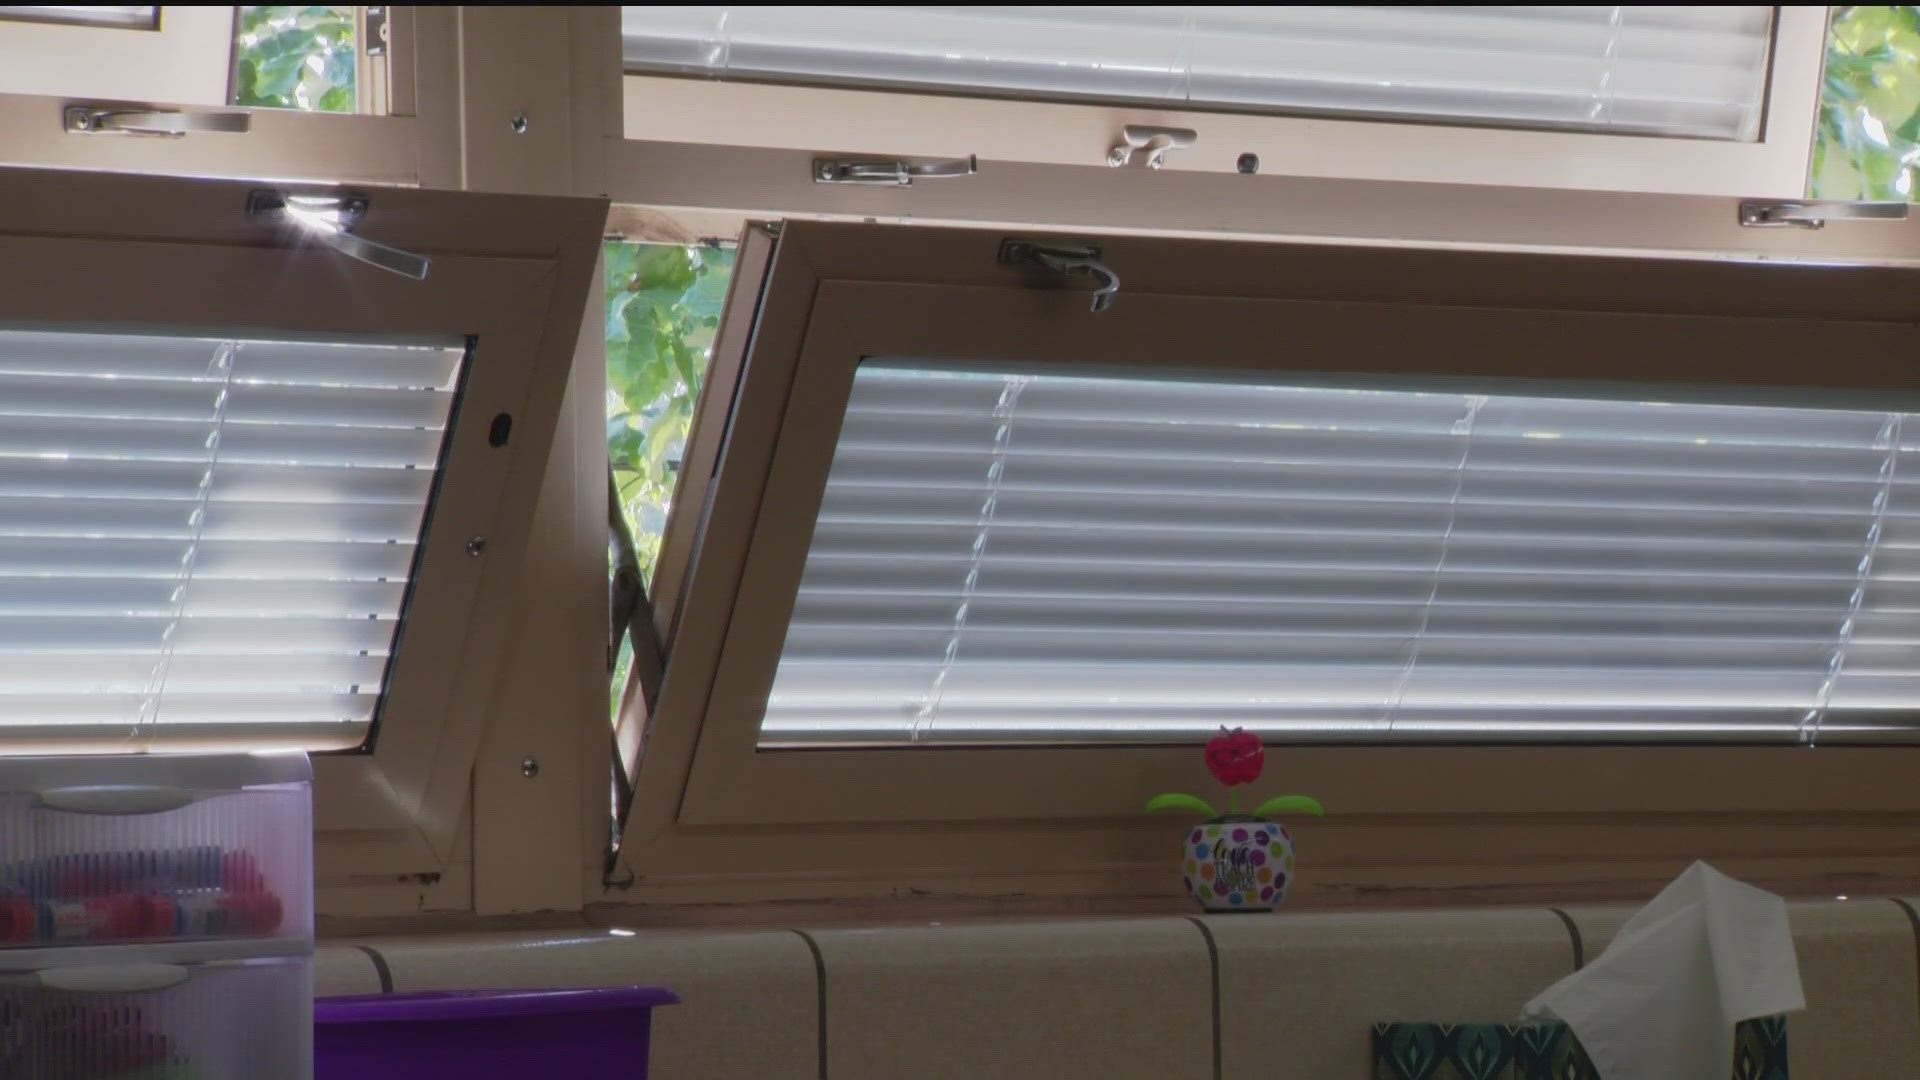 With hot August weather forecasted for the first few days of school, concerns over air conditioning are back to the front of many parents' minds.